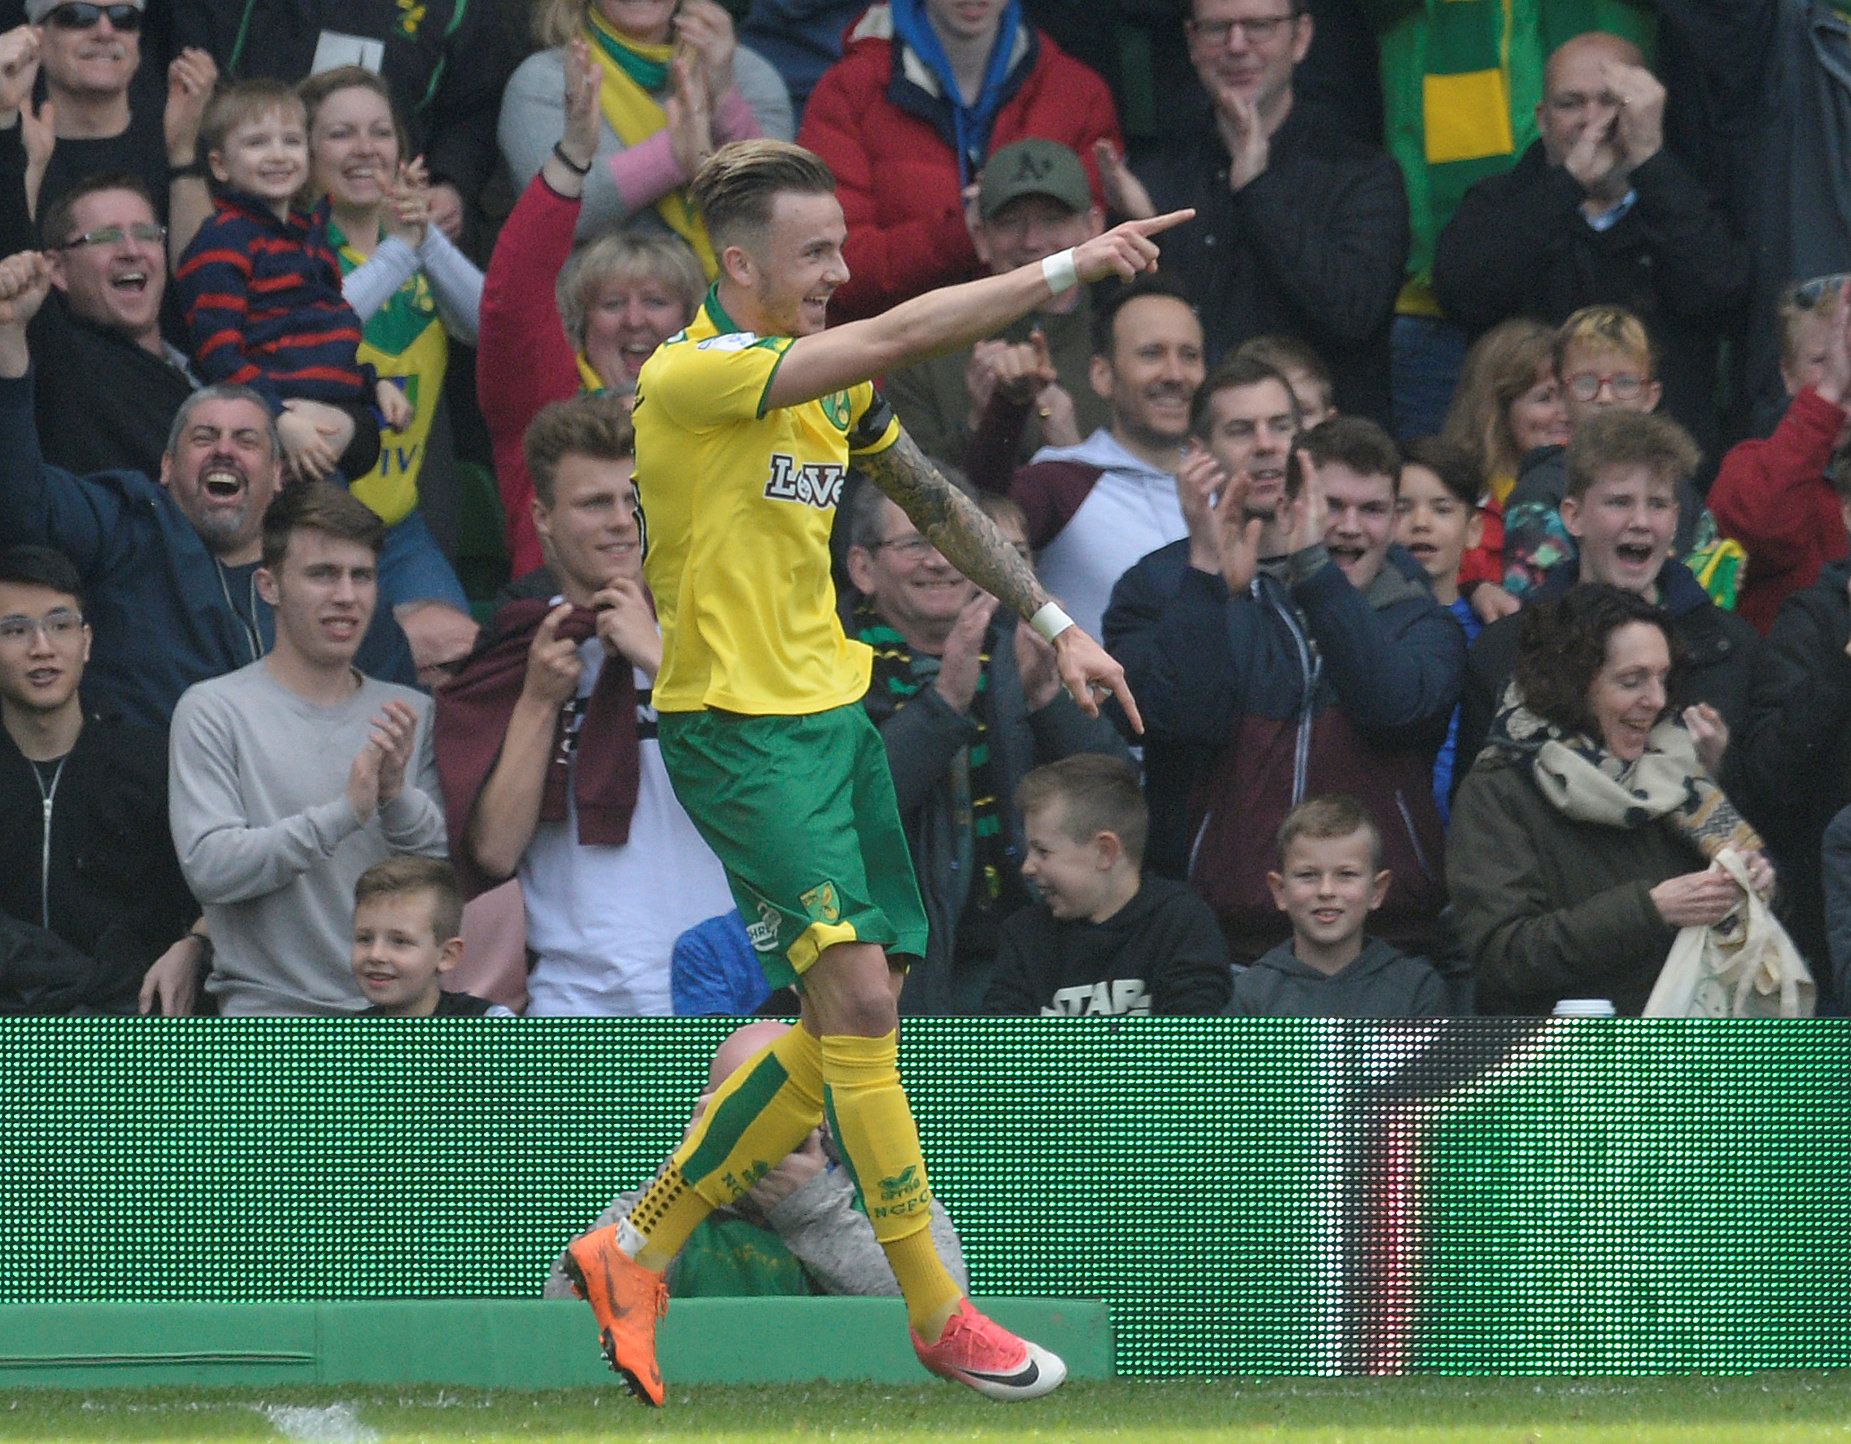 Soccer Football - Championship - Norwich City vs Aston Villa - Carrow Road, Norwich, Britain - April 7, 2018  Norwich's James Maddison celebrates scoring their third goal     Action Images/Alan Walter  EDITORIAL USE ONLY. No use with unauthorized audio, video, data, fixture lists, club/league logos or "live" services. Online in-match use limited to 75 images, no video emulation. No use in betting, games or single club/league/player publications. Please contact your account representative for fur